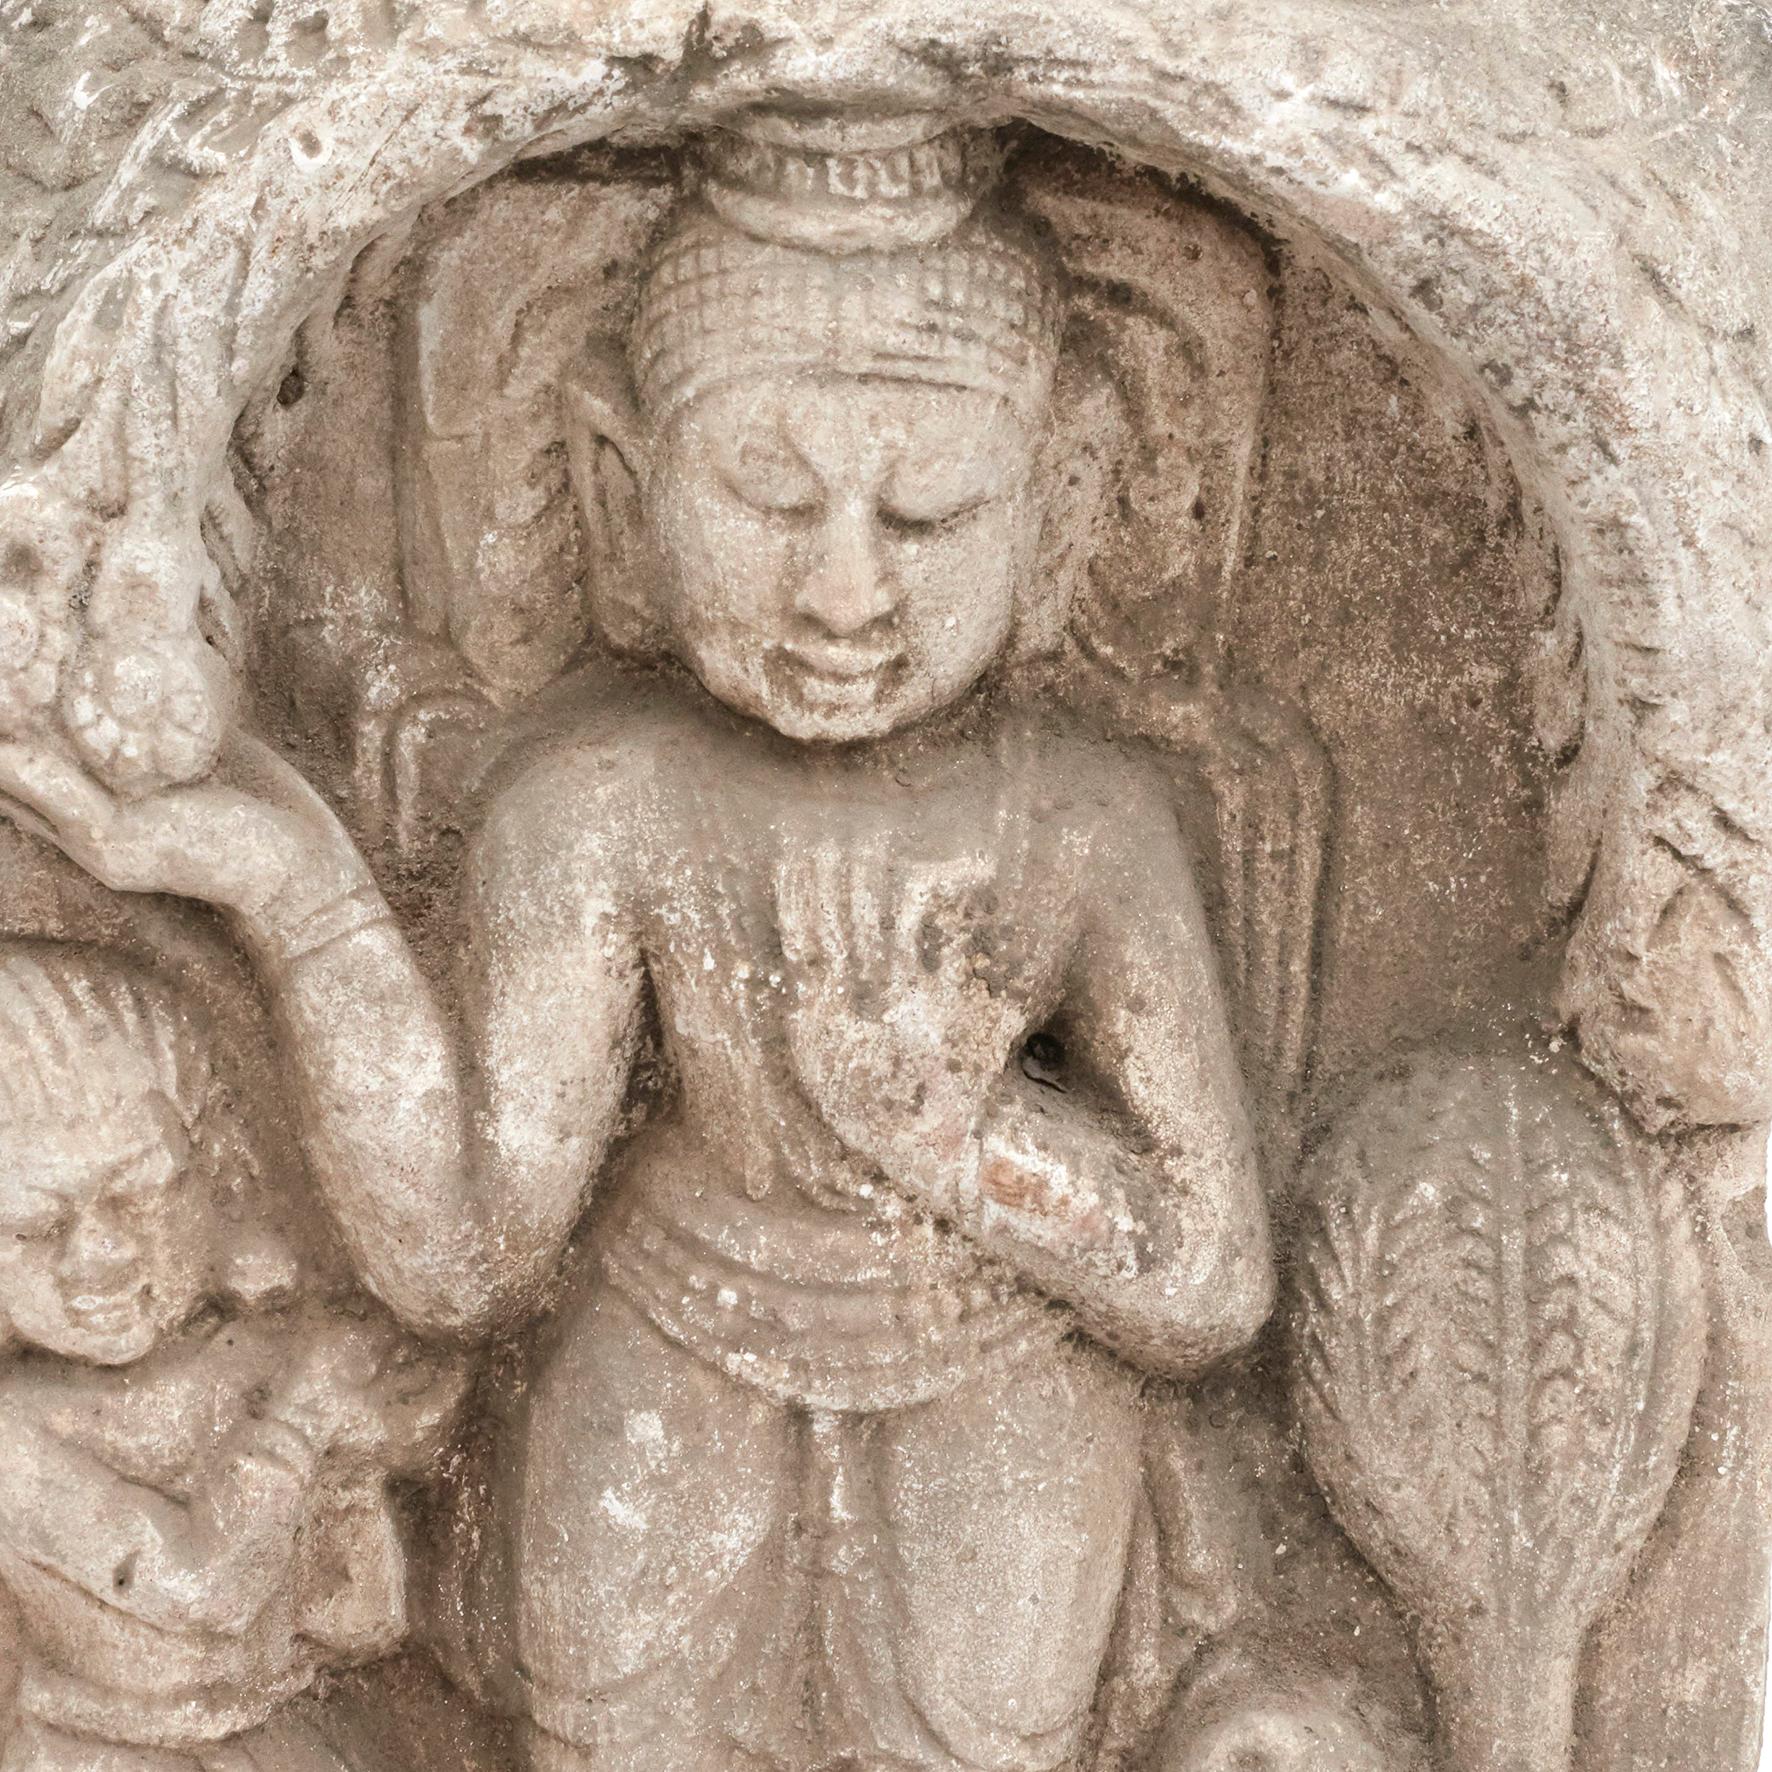 400-500 years old hand carved sandstone sculpture of a standning Buddha flanked by a munk and a mythical animal.
Originates from pagoda / temple in Arakan, a coastal geographic region in southern Myanmar (Burma), circa 1400-1600.
Mounted on a